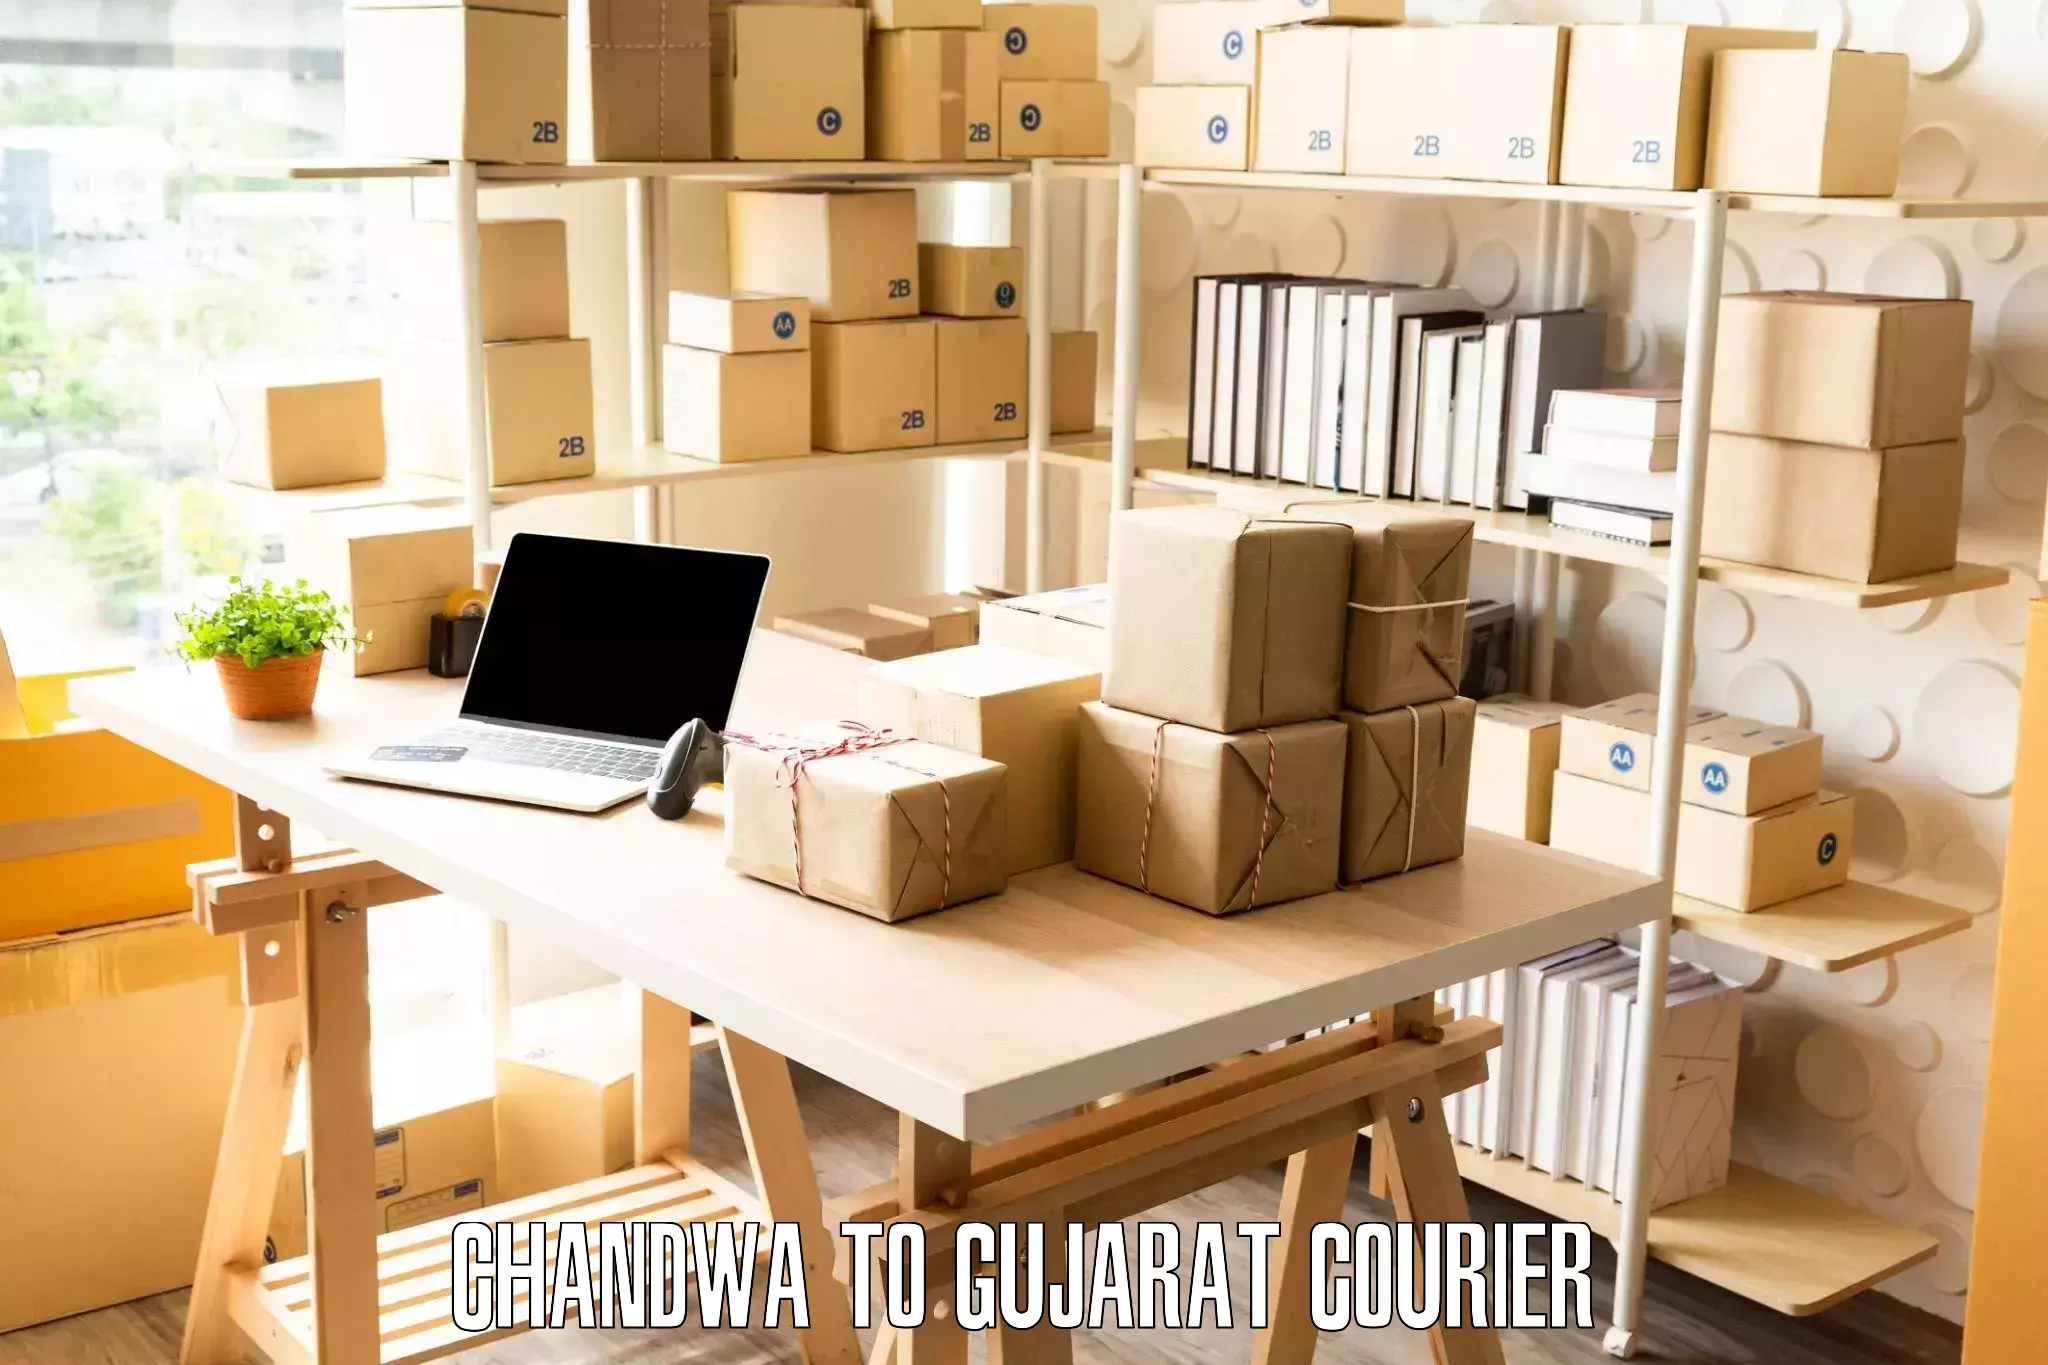 Professional movers and packers Chandwa to Gujarat